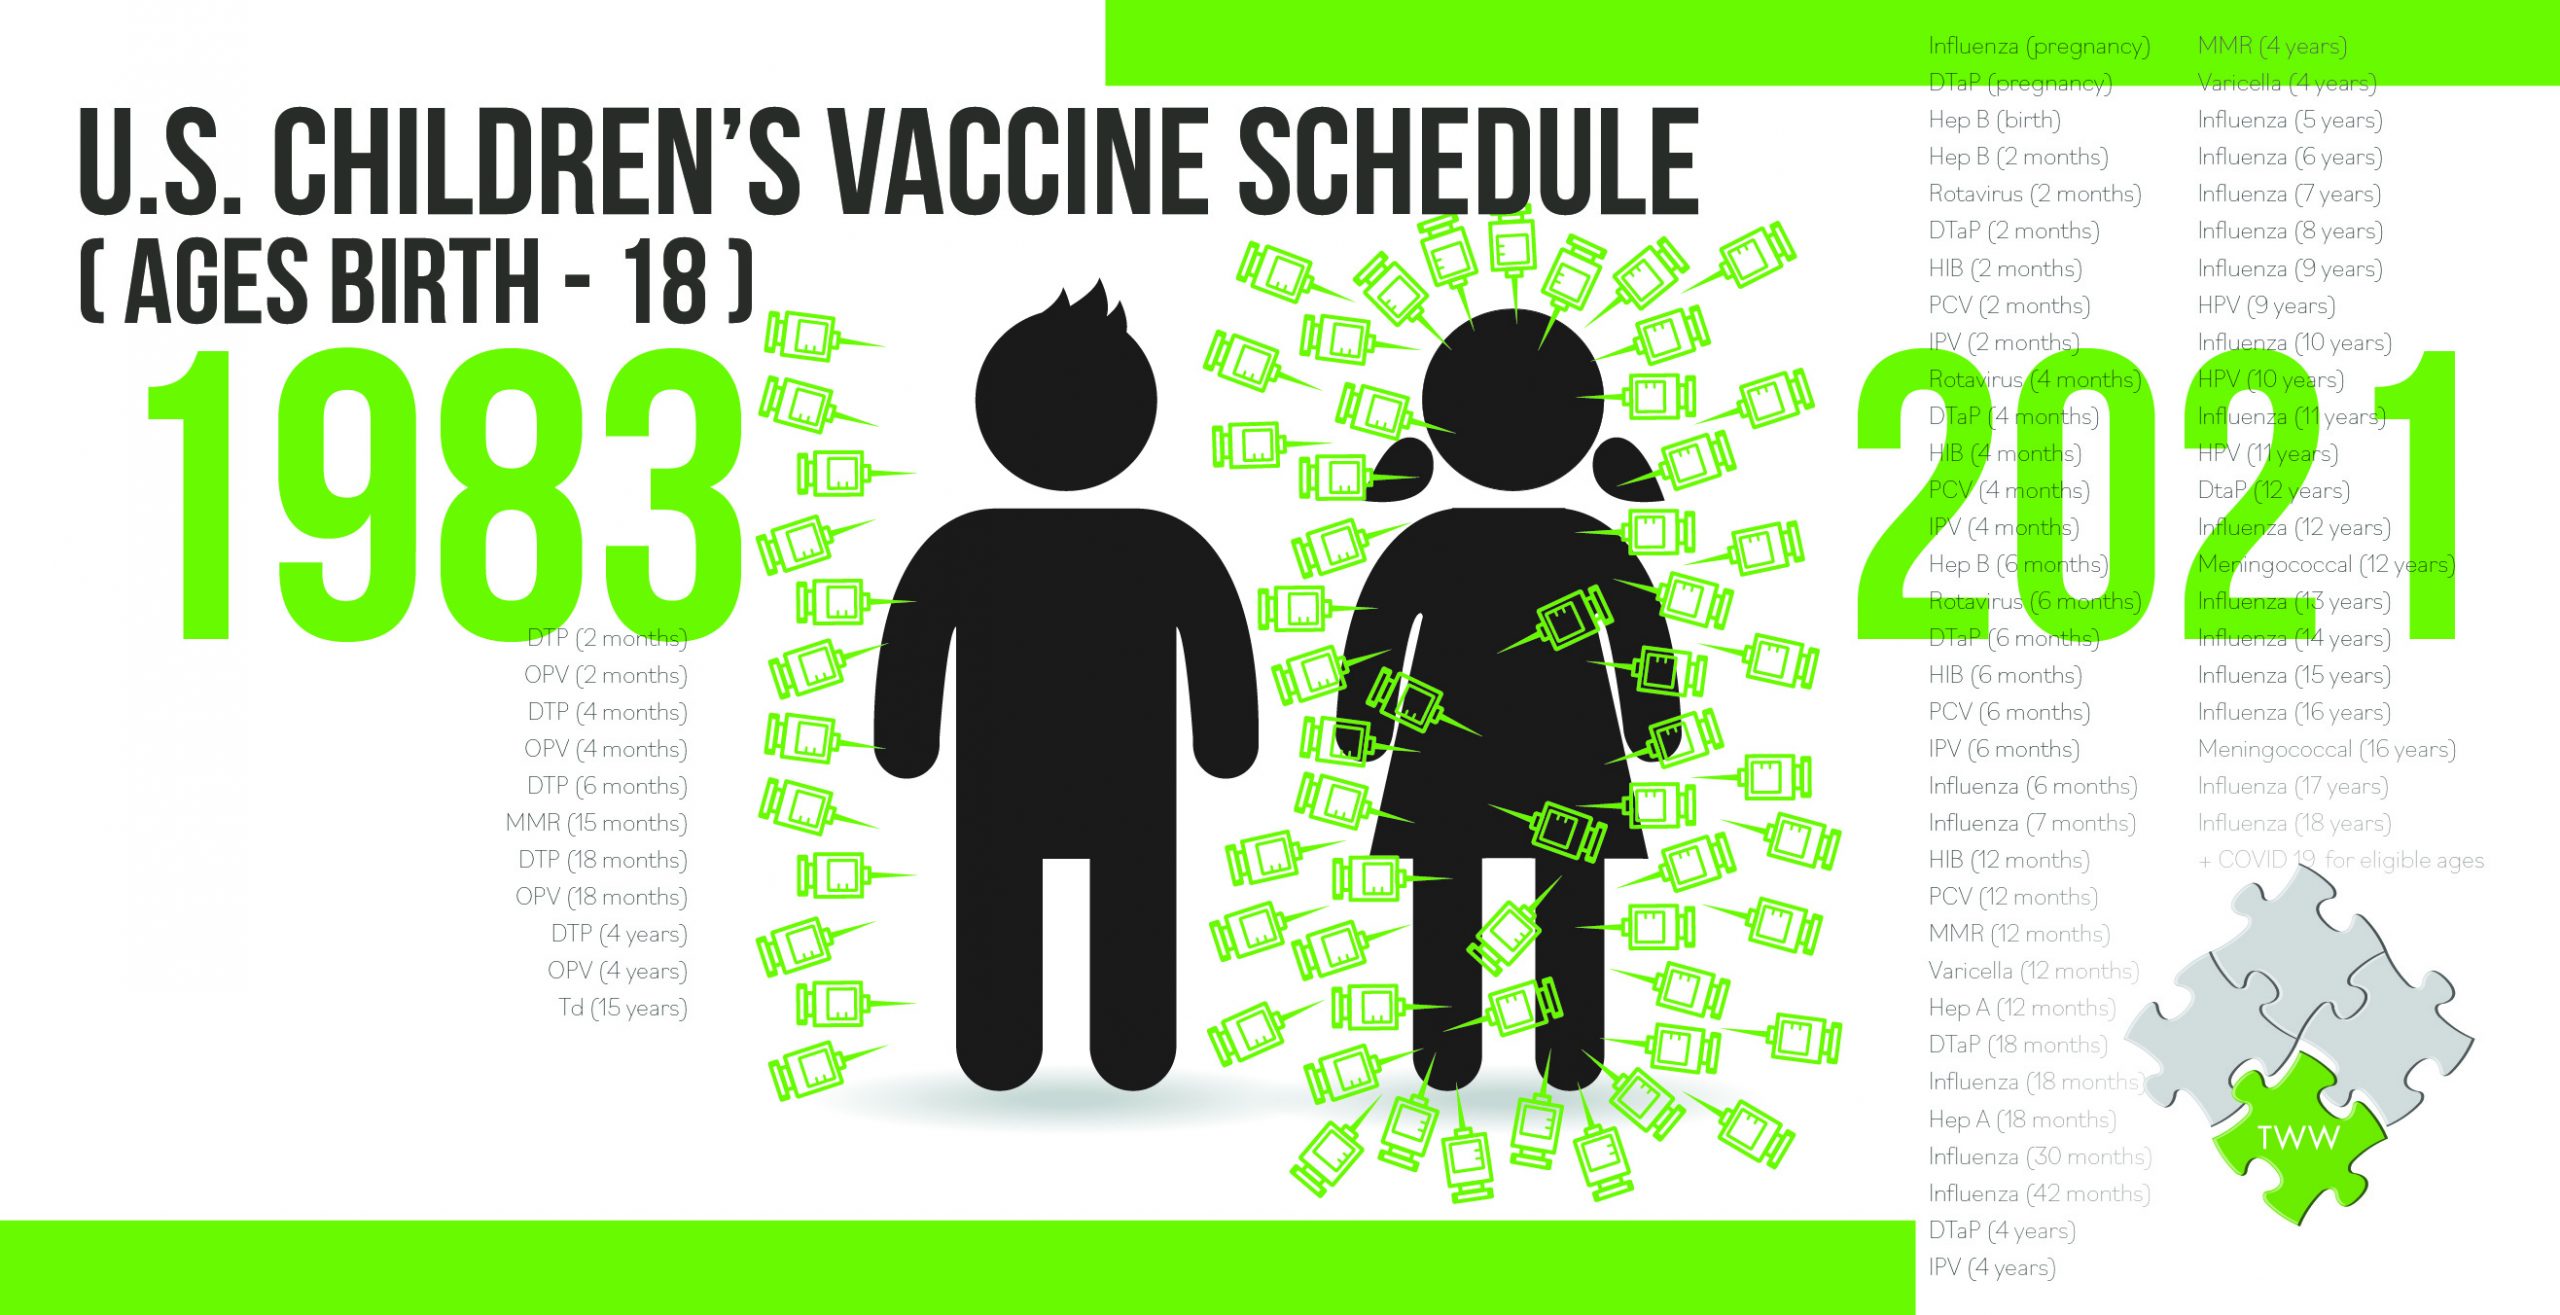 An infographic depicting the number of vaccines a child in 1983 versus 2021